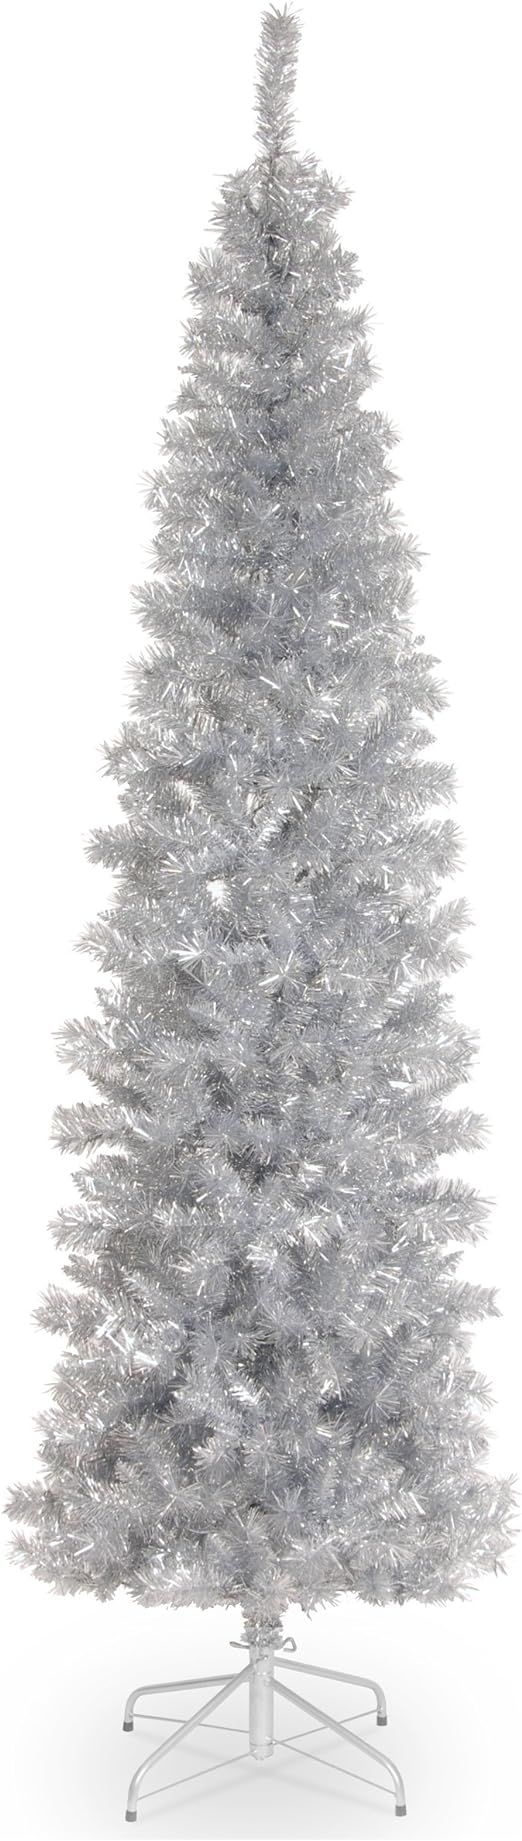 National Tree 6 Foot Silver Tinsel Tree with Metal Stand (TT33-700-60) | Amazon (US)